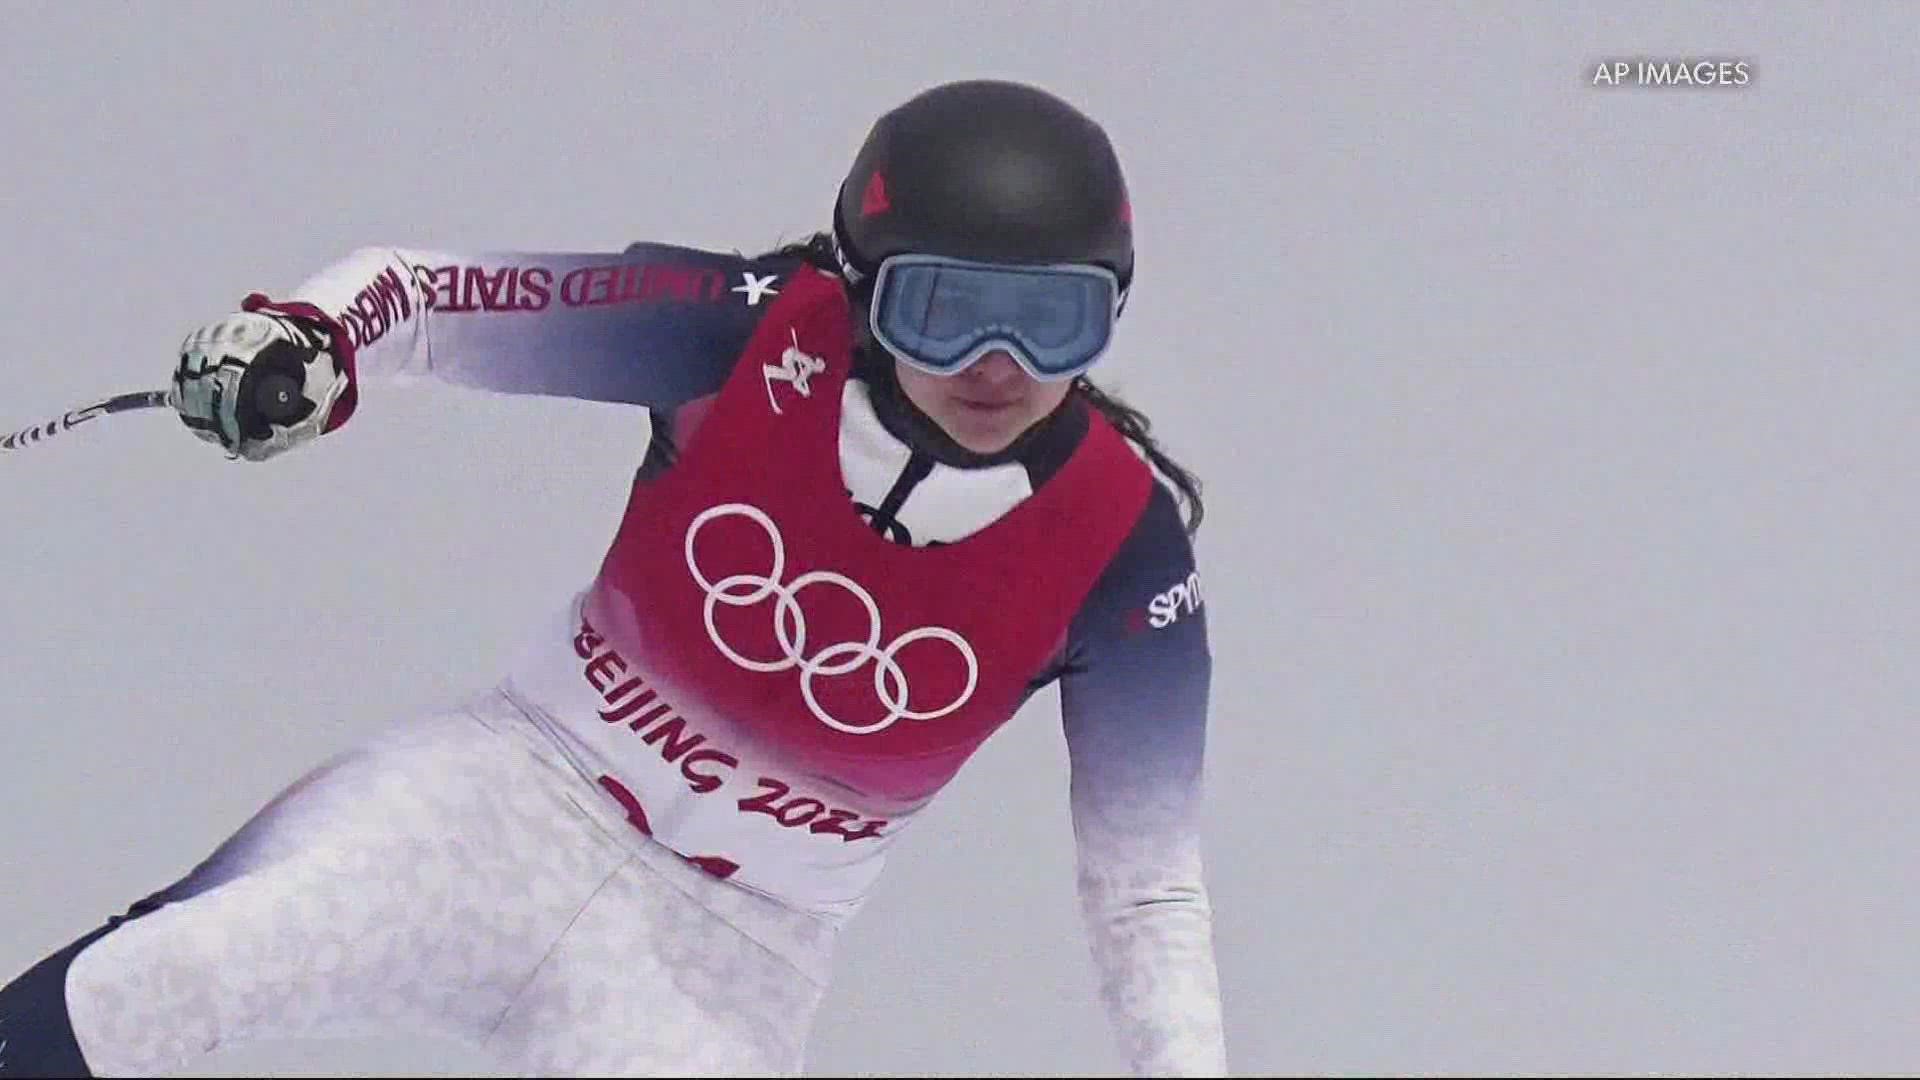 Three-time Olympian Jackie Wiles of Portland is set to compete in downhill at the Winter Olympics on Feb. 14.